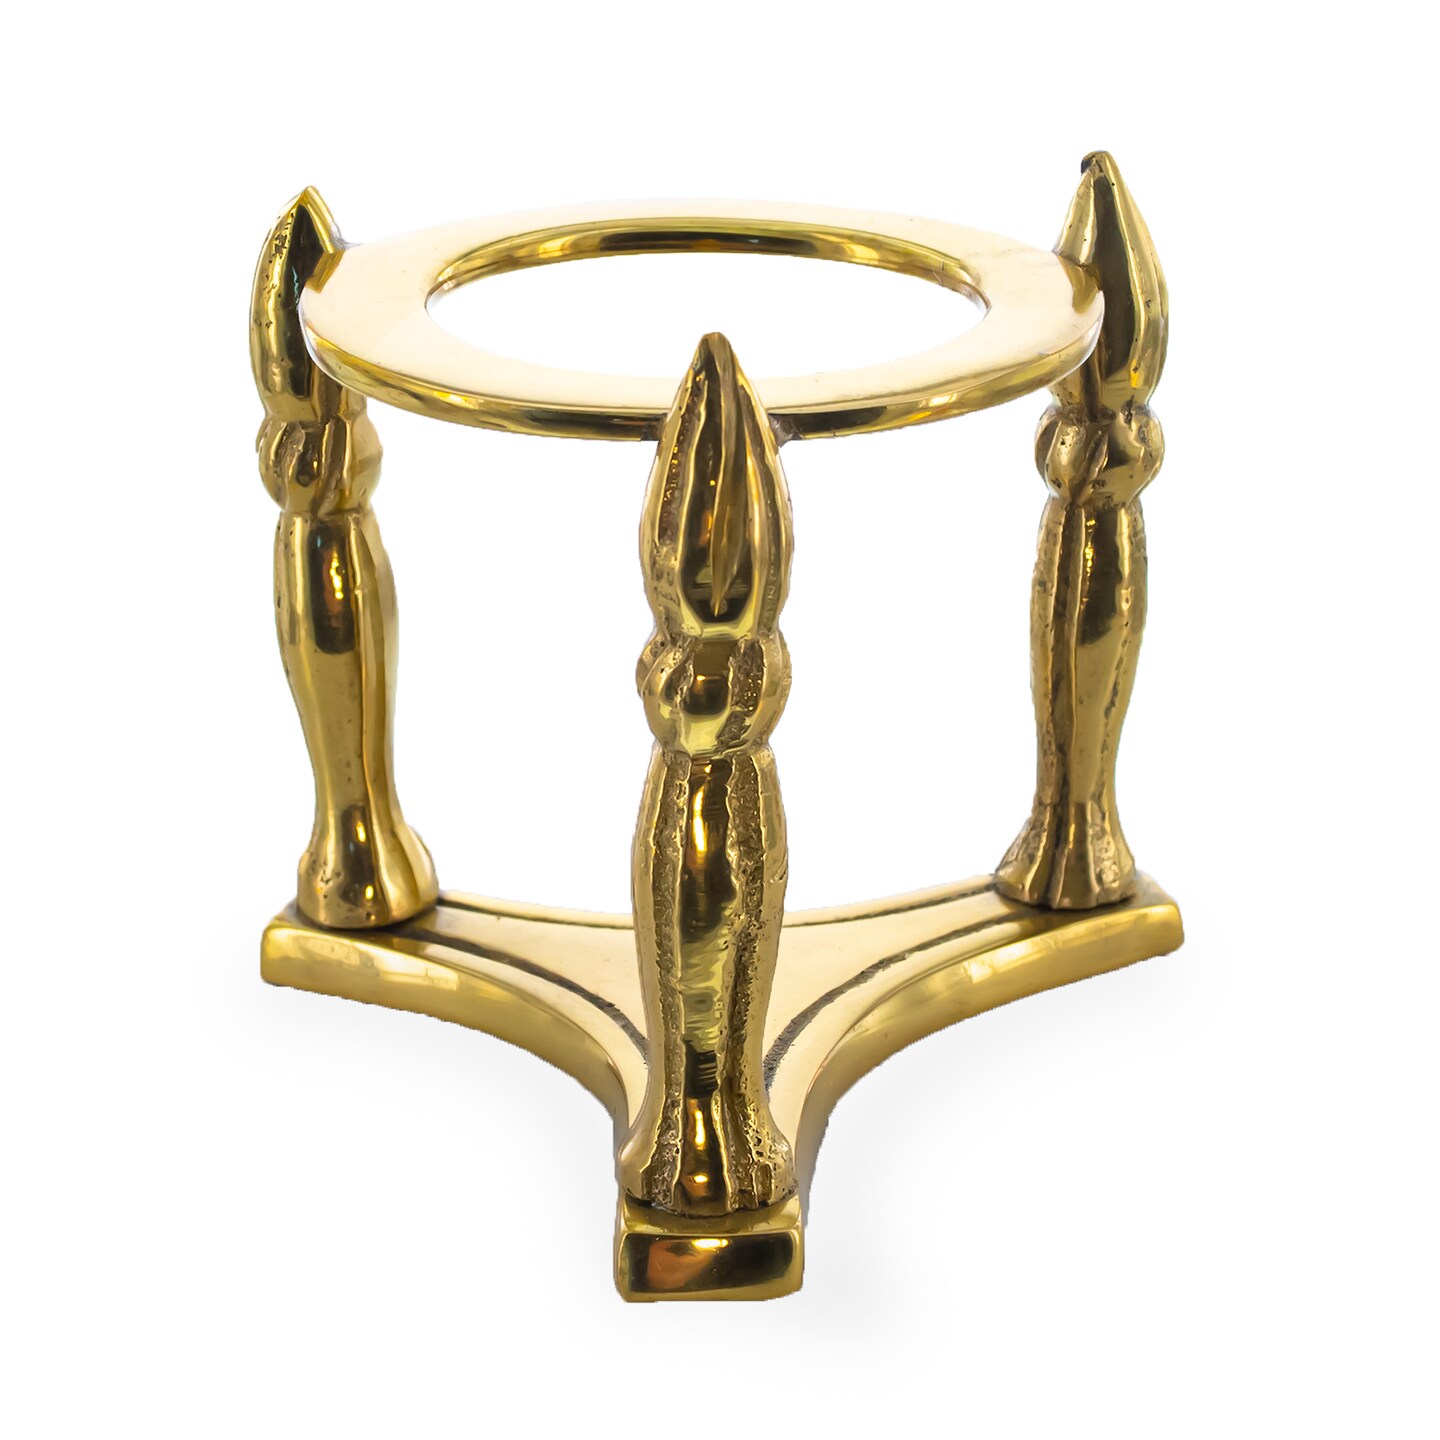 Three Pillars Gold Tone Metal Egg Stand Holder 2.5 Inches